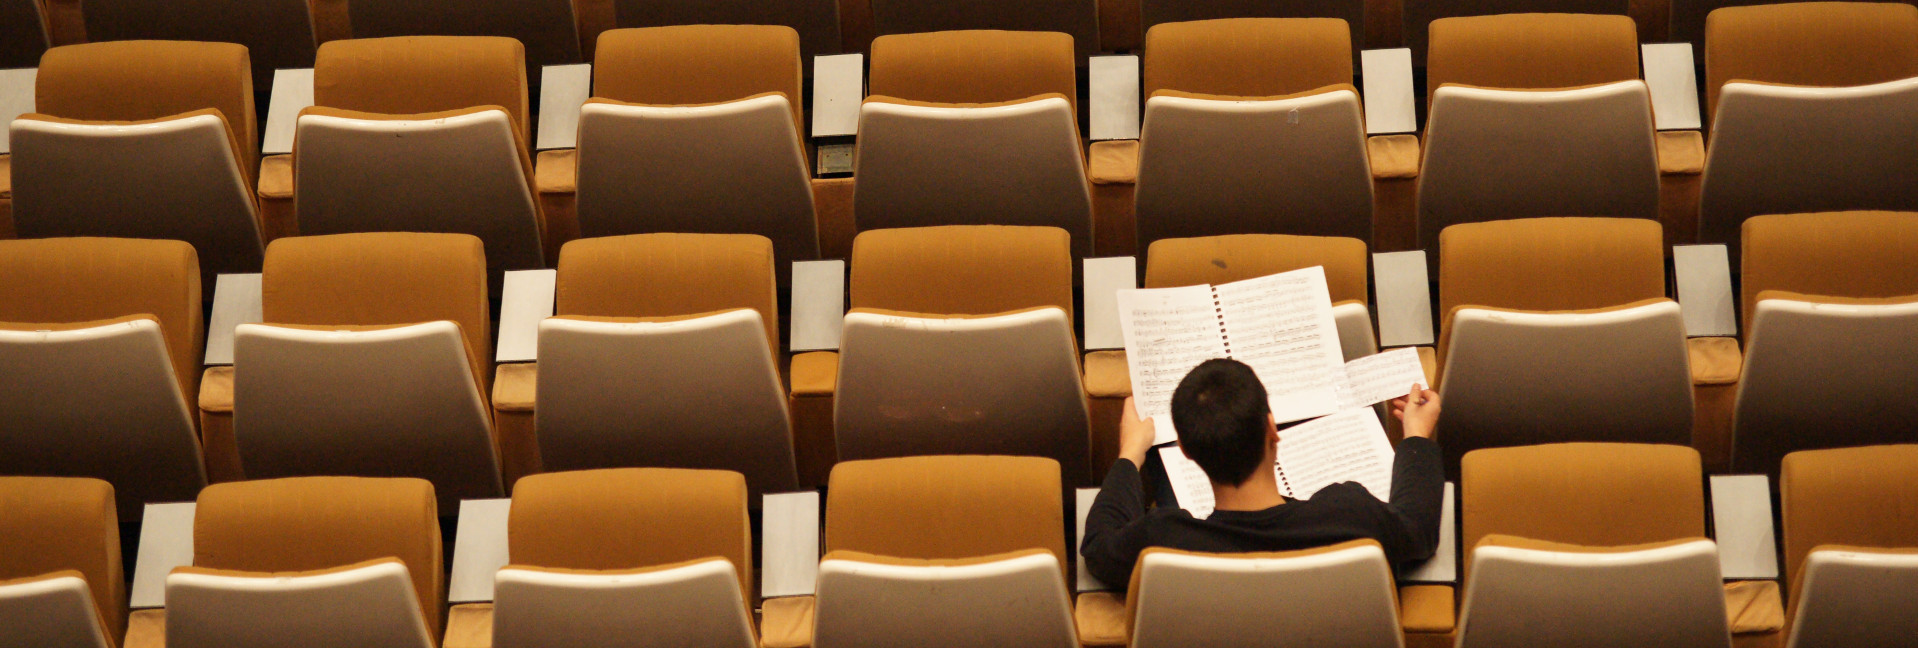 Overhead photo of a single student in a lecture hall